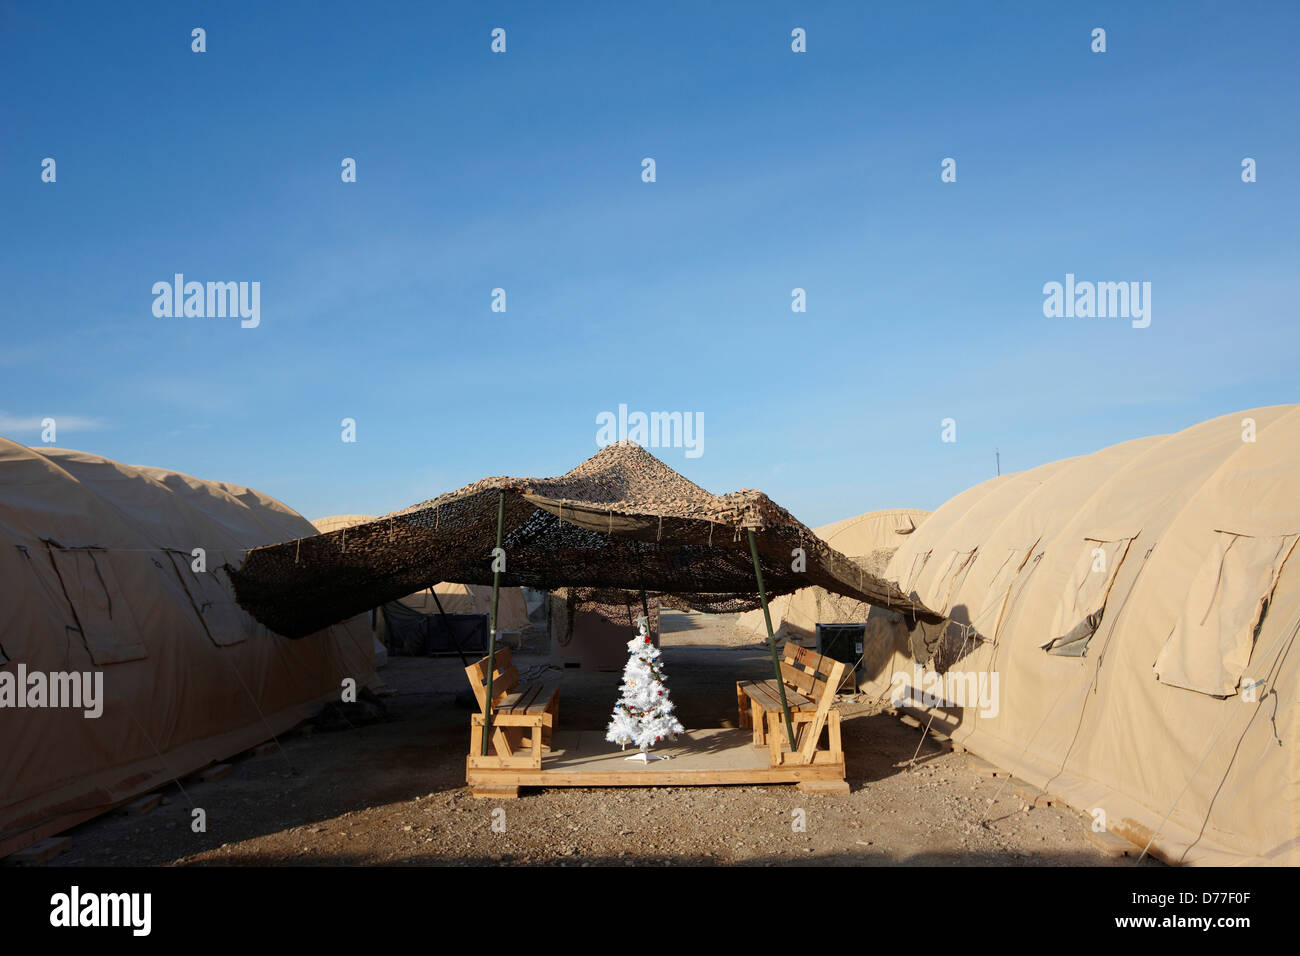 Christmas tree amid military tents Camp Leatherneck Helmand Province Afghanistan Stock Photo